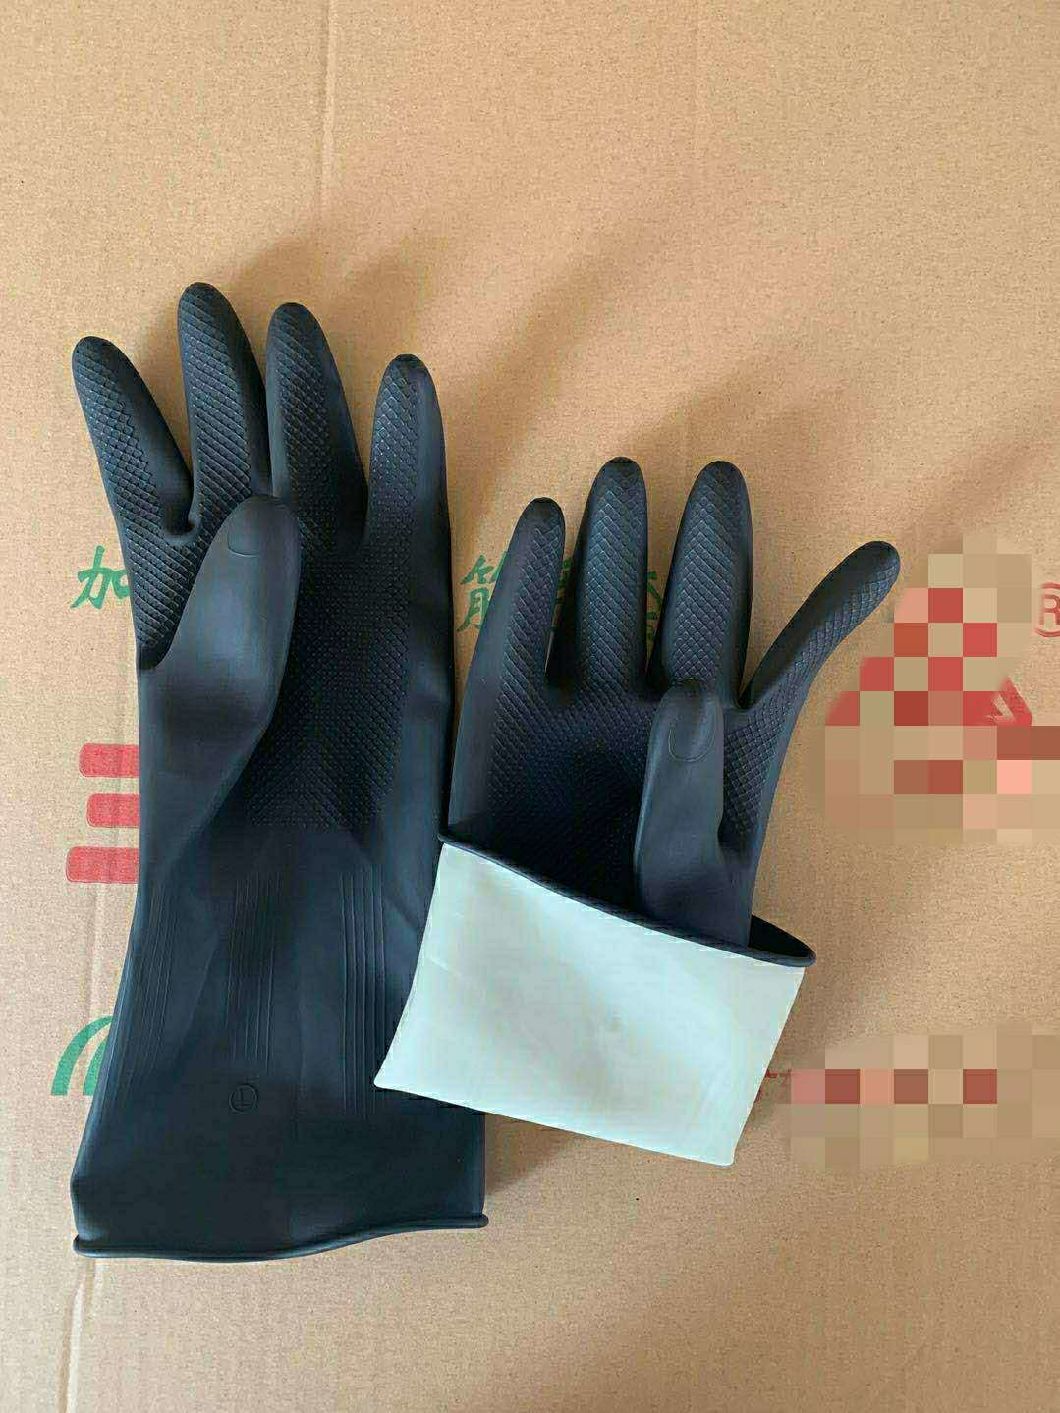 Latex /Rubber Gloves for Hand Safety Protection with Ce Certification